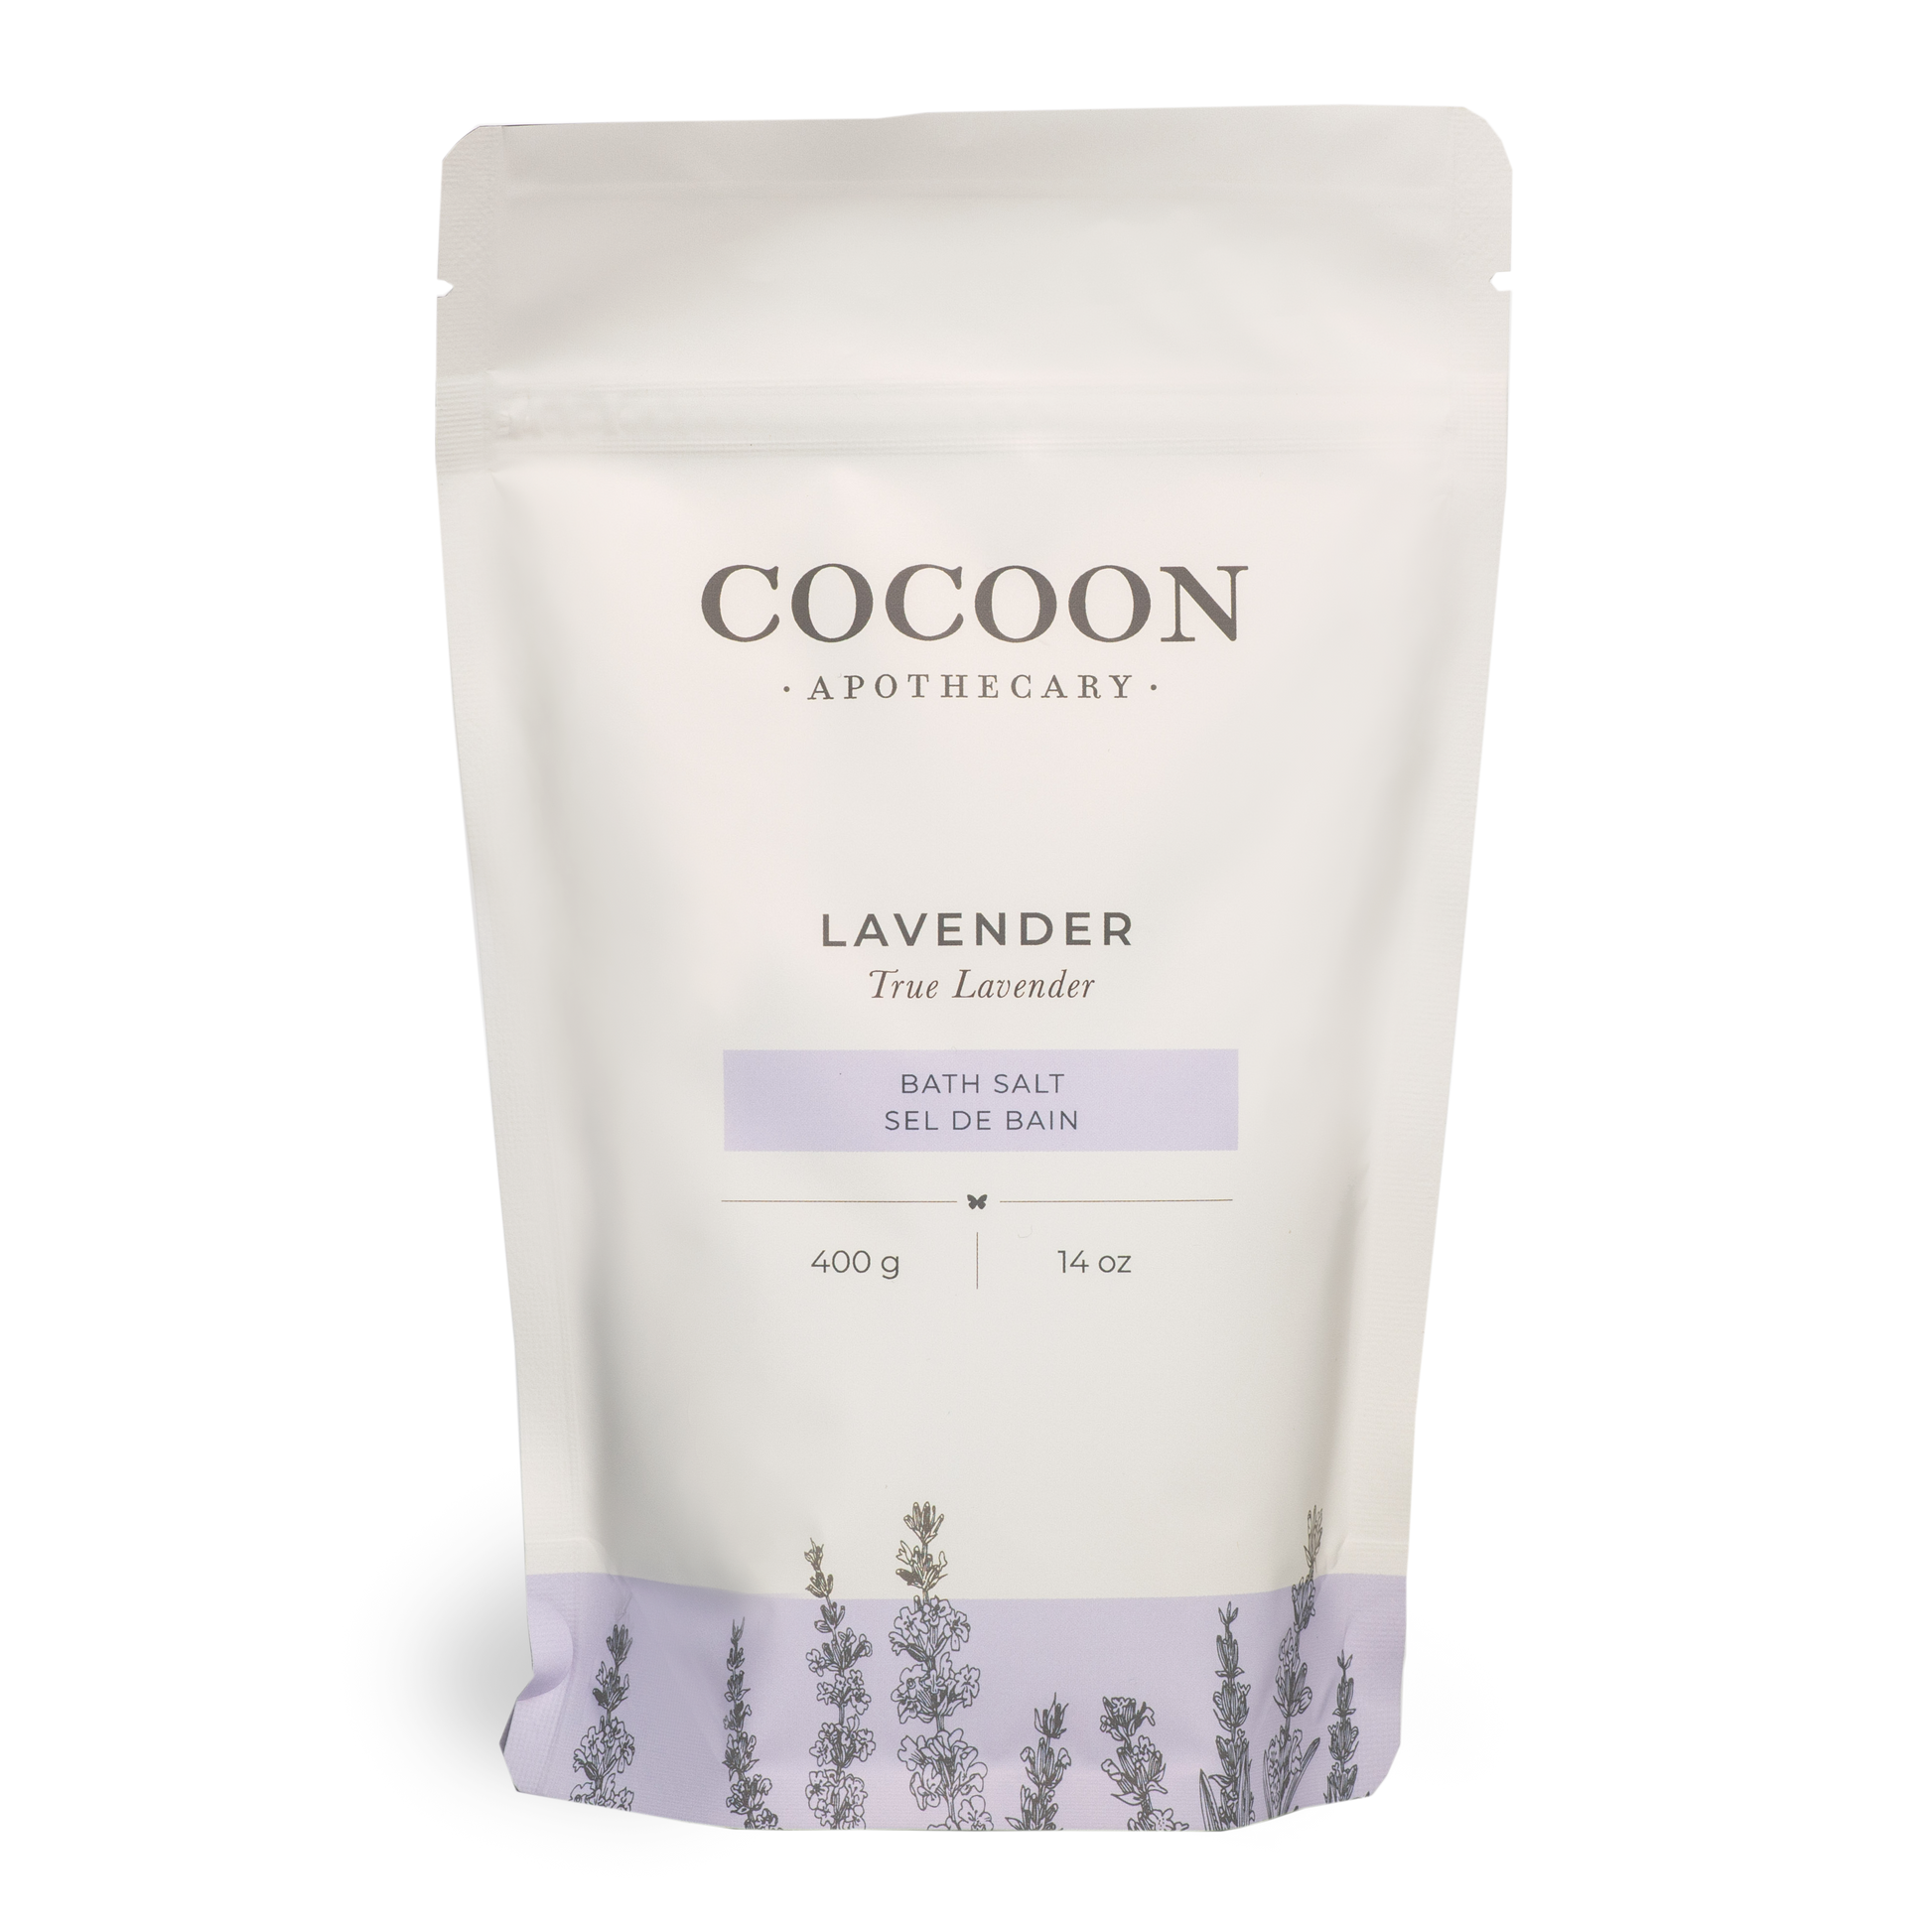 Mineral rich Dead Sea salts, Epsom salts and pure essential oils creates a spa-like bathing experience. Lavender is the ultimate clean scent and is known for its relaxing properties.